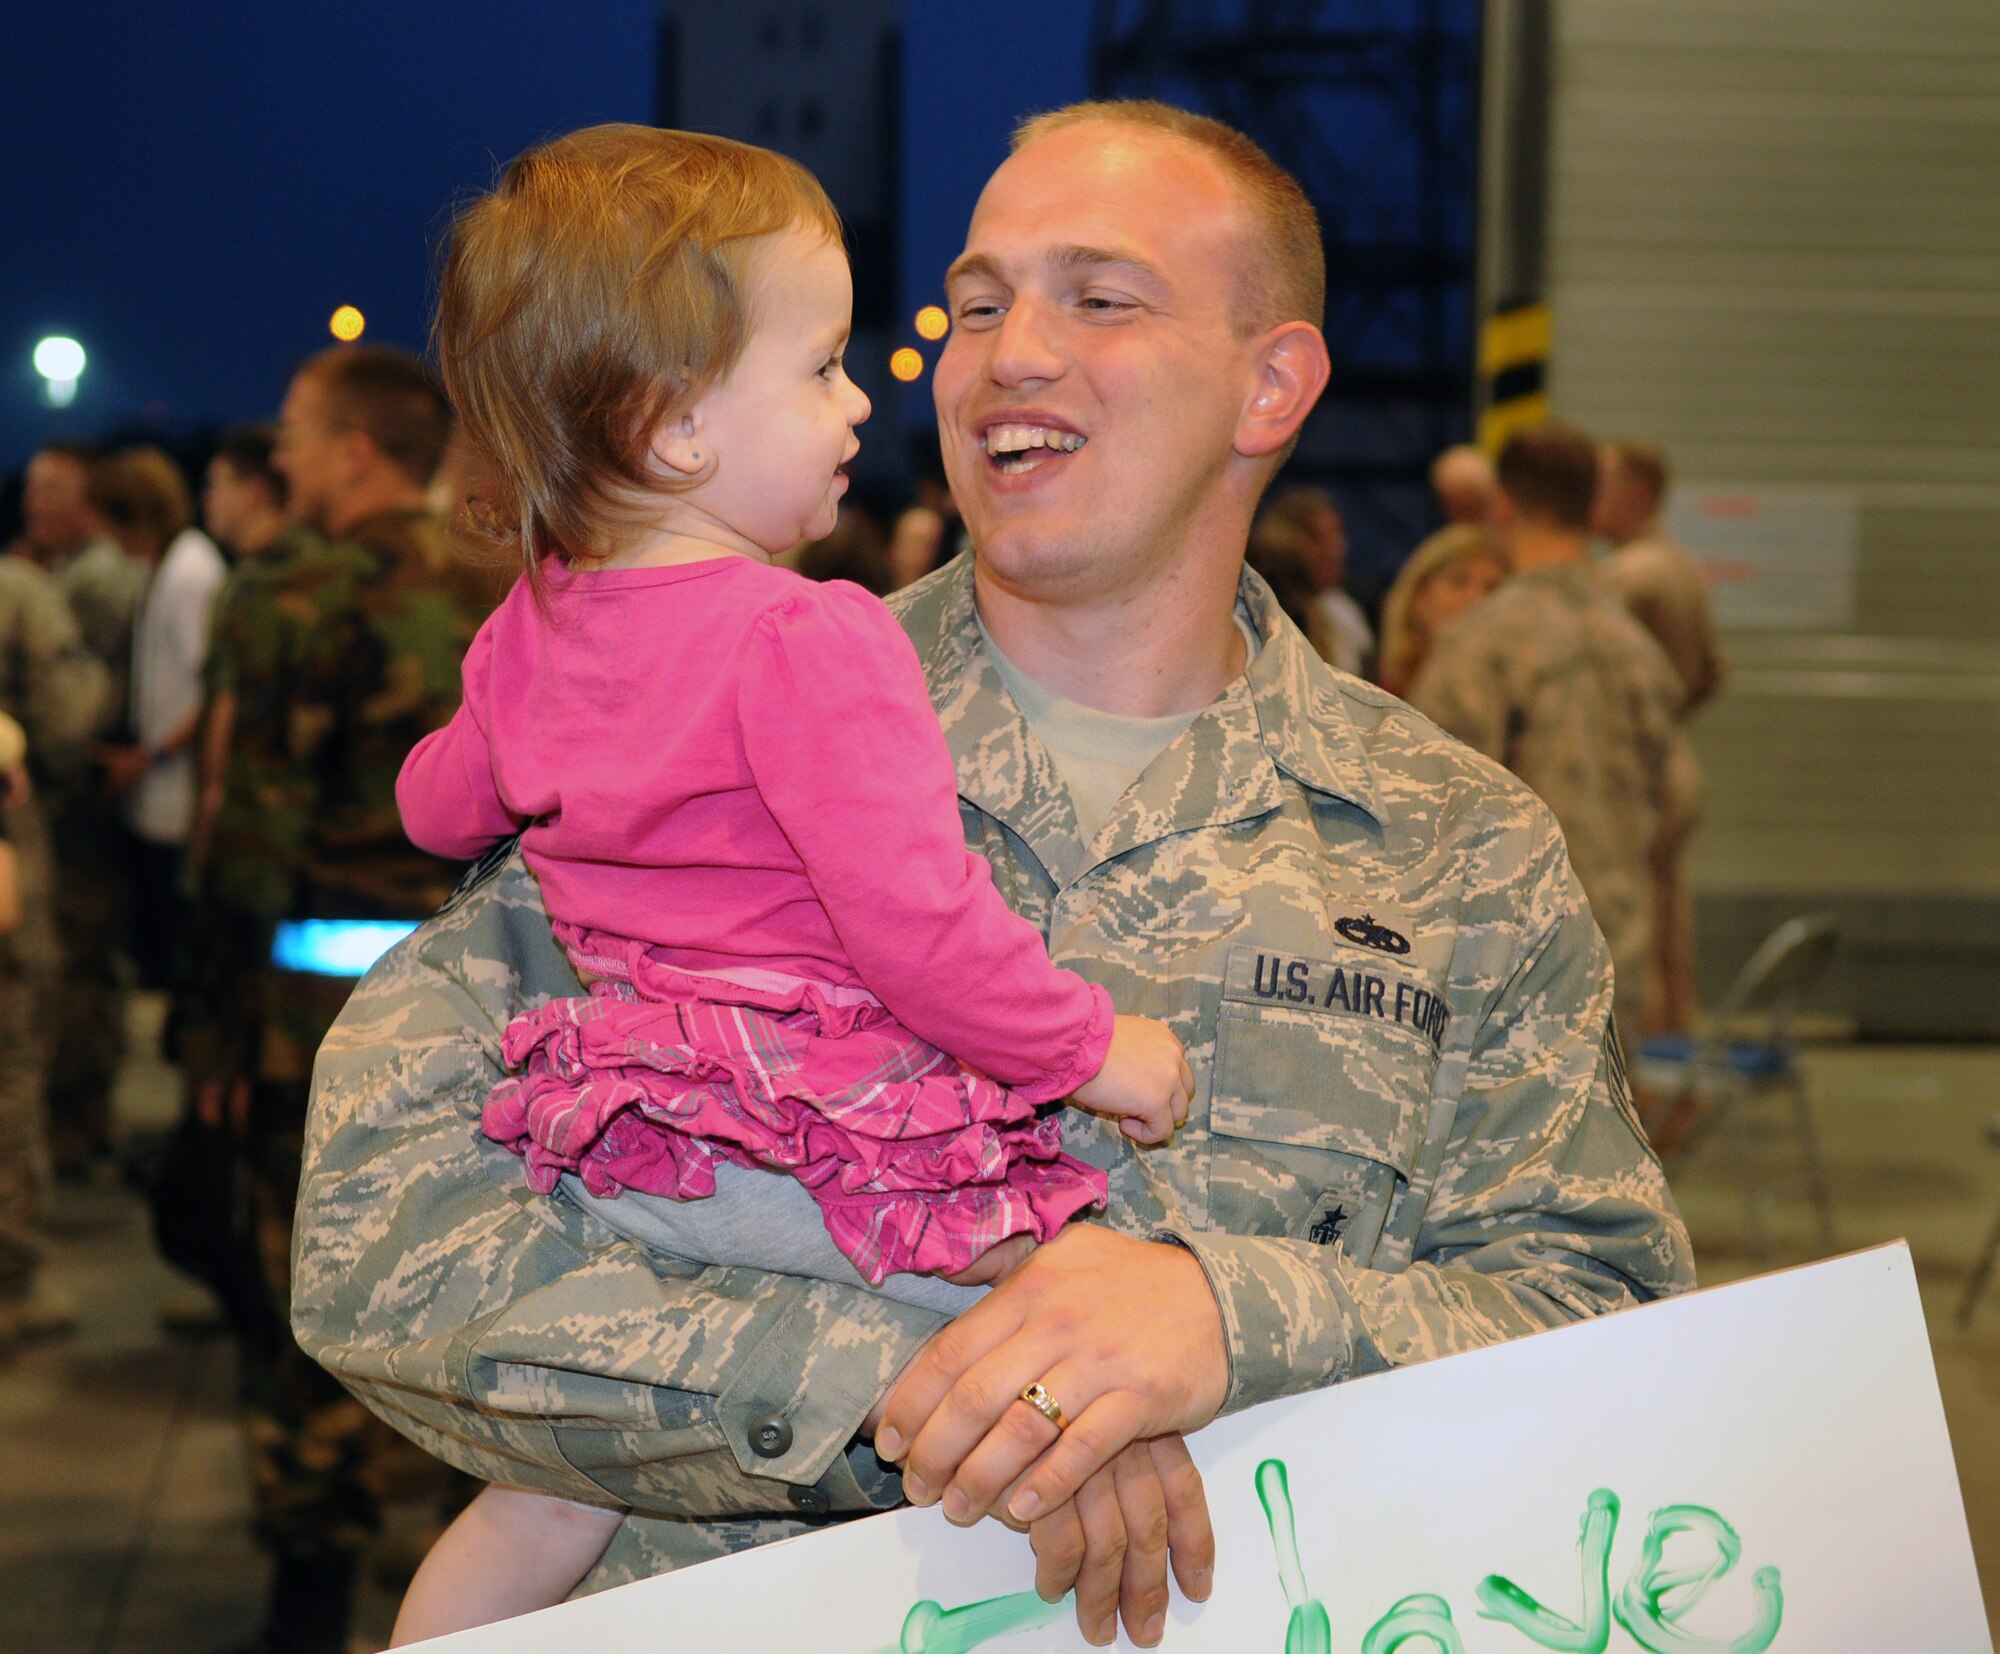 SPANGDAHLEM AIR BASE, Germany - Staff Sgt. Narley Wright, 52nd Equipment Maintenance Squadron, holds his daughter, Jasmine, at the 22nd Fighter Squadron redeployment party Sept. 28 at a hangar here. Sergeant Wright was deployed for four months to Joint Base Balad, Iraq, in direct support of the 22nd FS. During the deployment, the 22nd FS flew nearly 1,500 sorties and logged more than 6,000 hours of flight time in support of Operation Iraqi Freedom. (U.S. Air Force photo/Airman 1st Class Nathanael Callon)